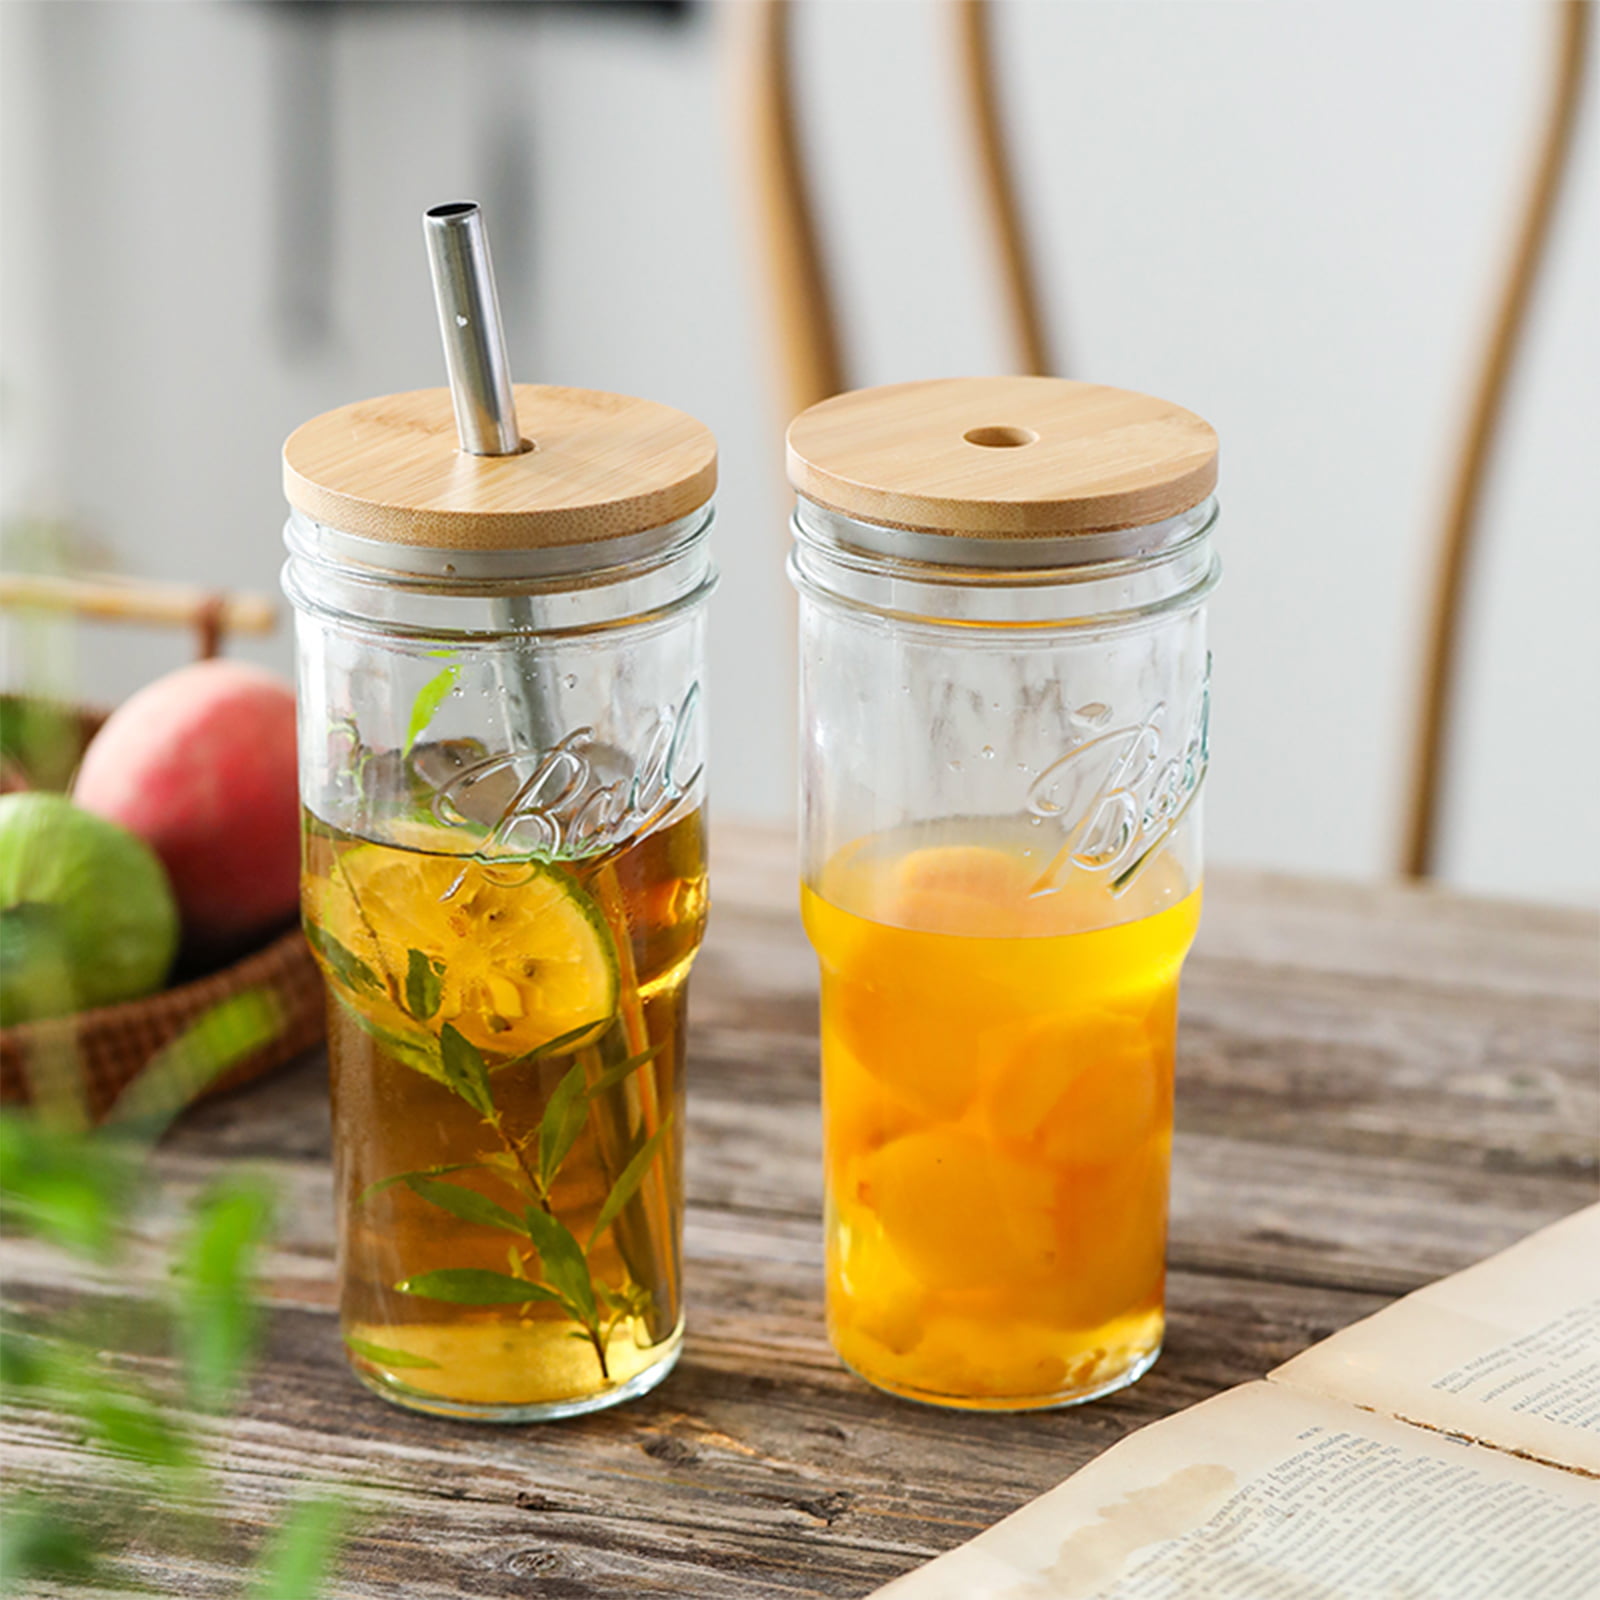  HELPFUL HOME Mason Jar Cups with Lids and Straws - Reusable,  Sturdy Food-Grade Crystal Glass Storage Jars - Easy to Clean, Eco-Friendly  Quality Bamboo Lids - Amazing Gift - 4-Pack 